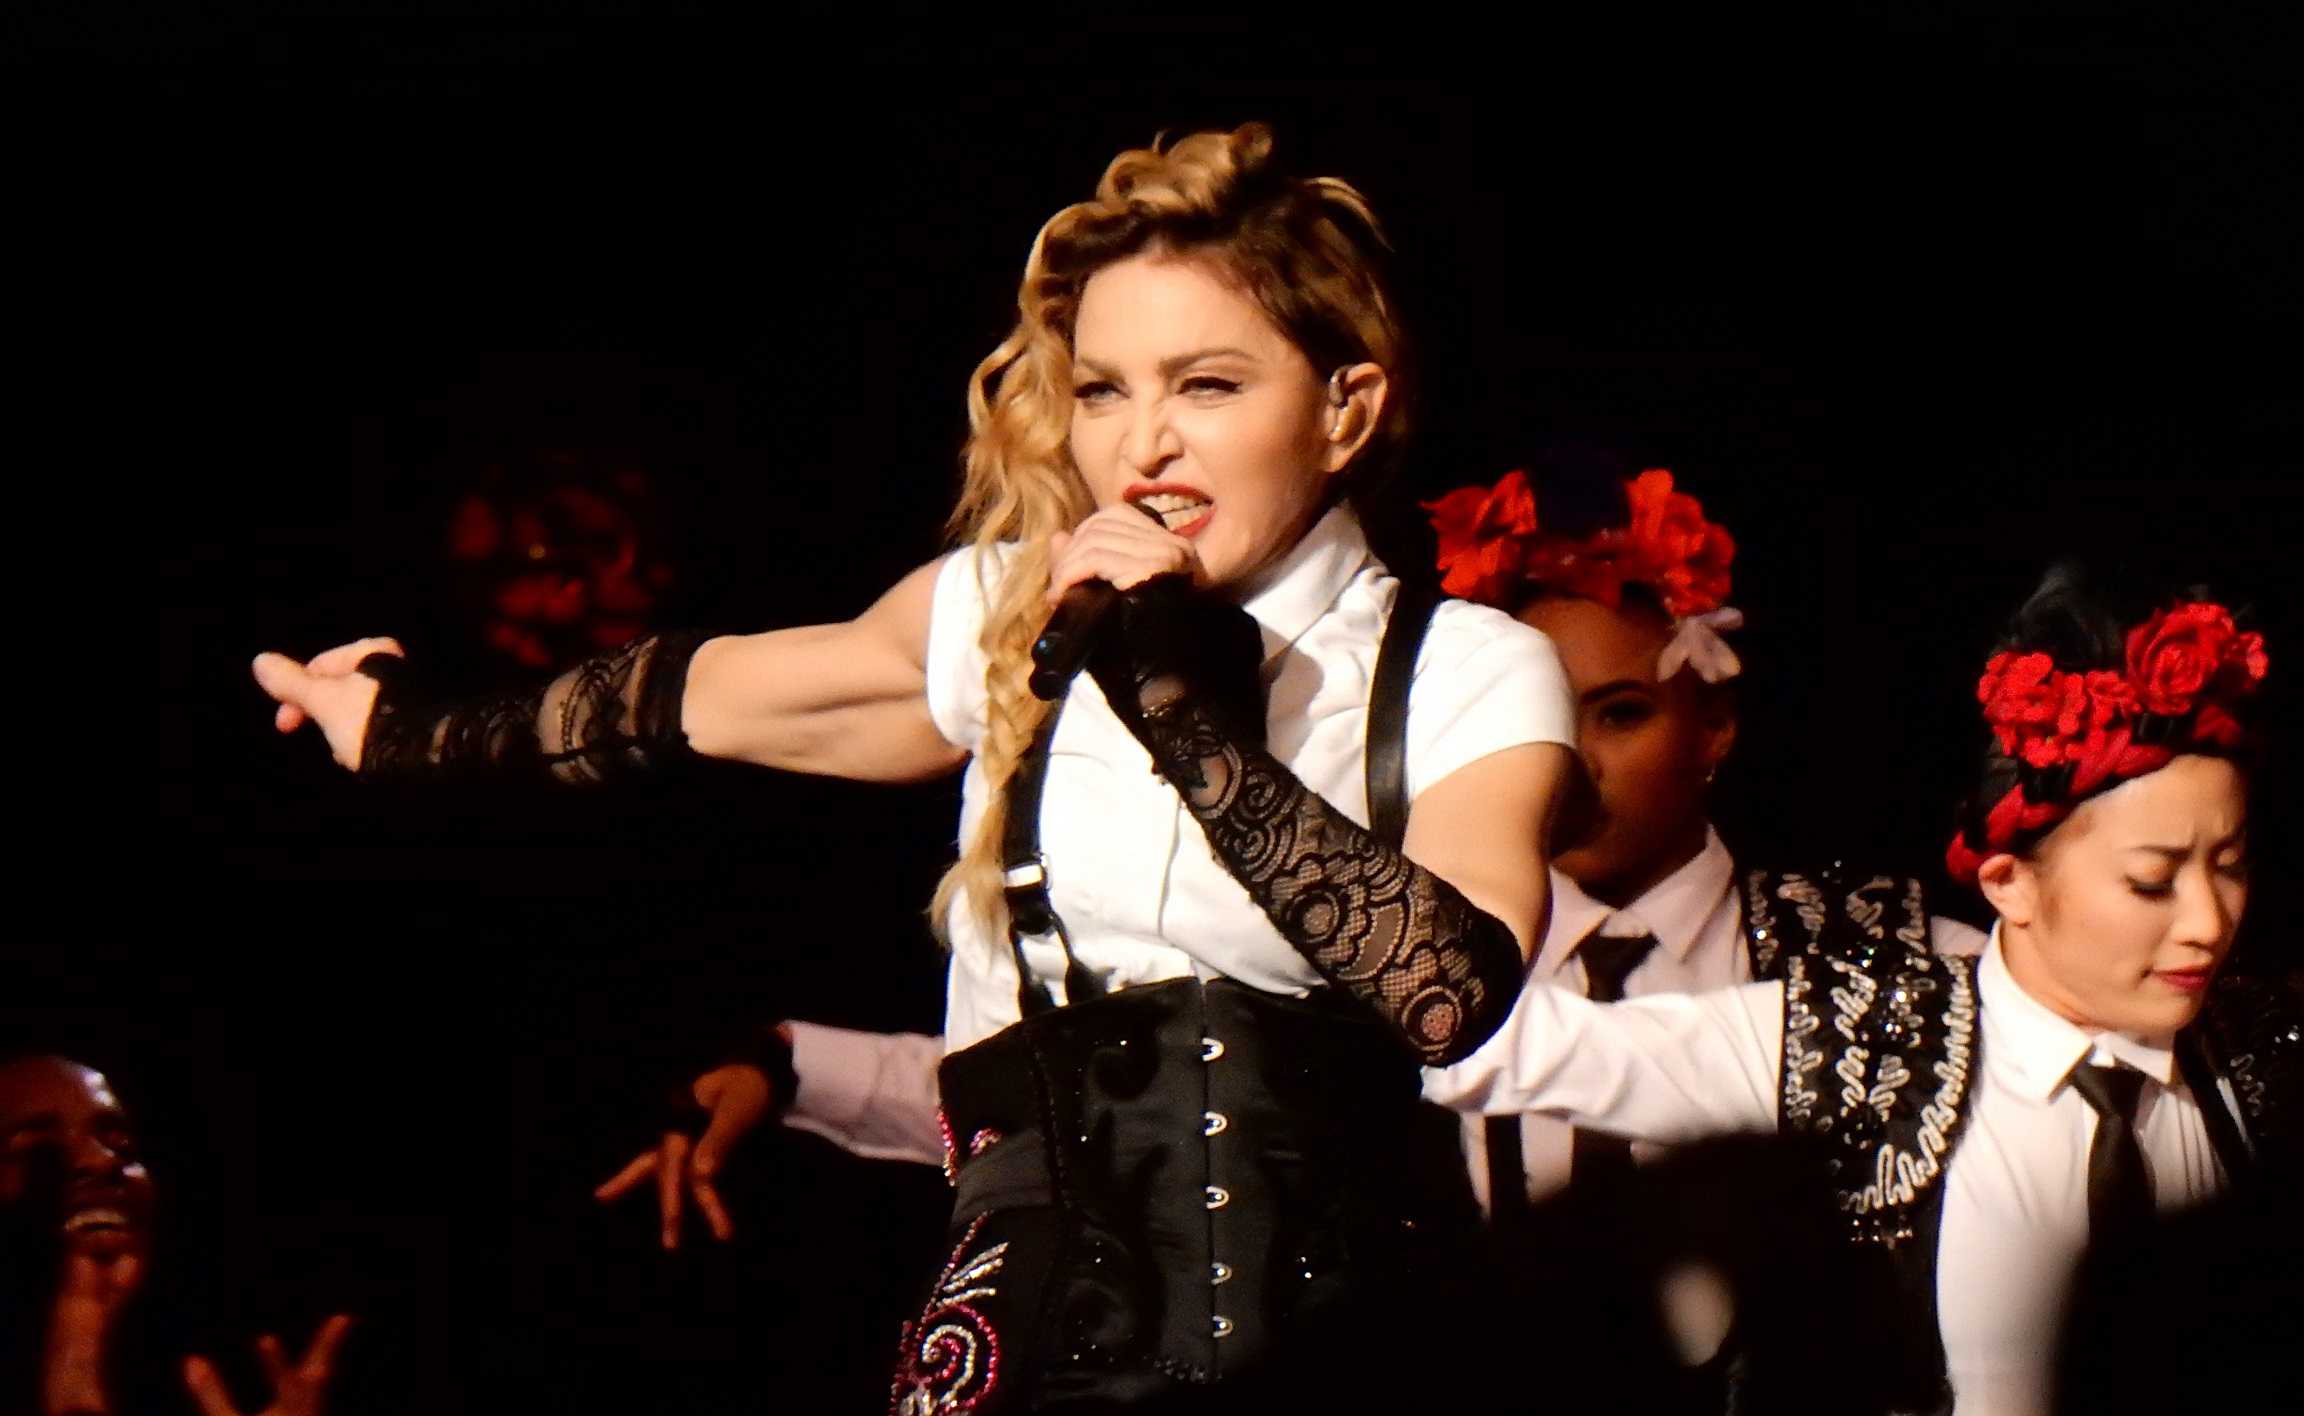 Madonna tour postponed to due to “serious bacterial infection”